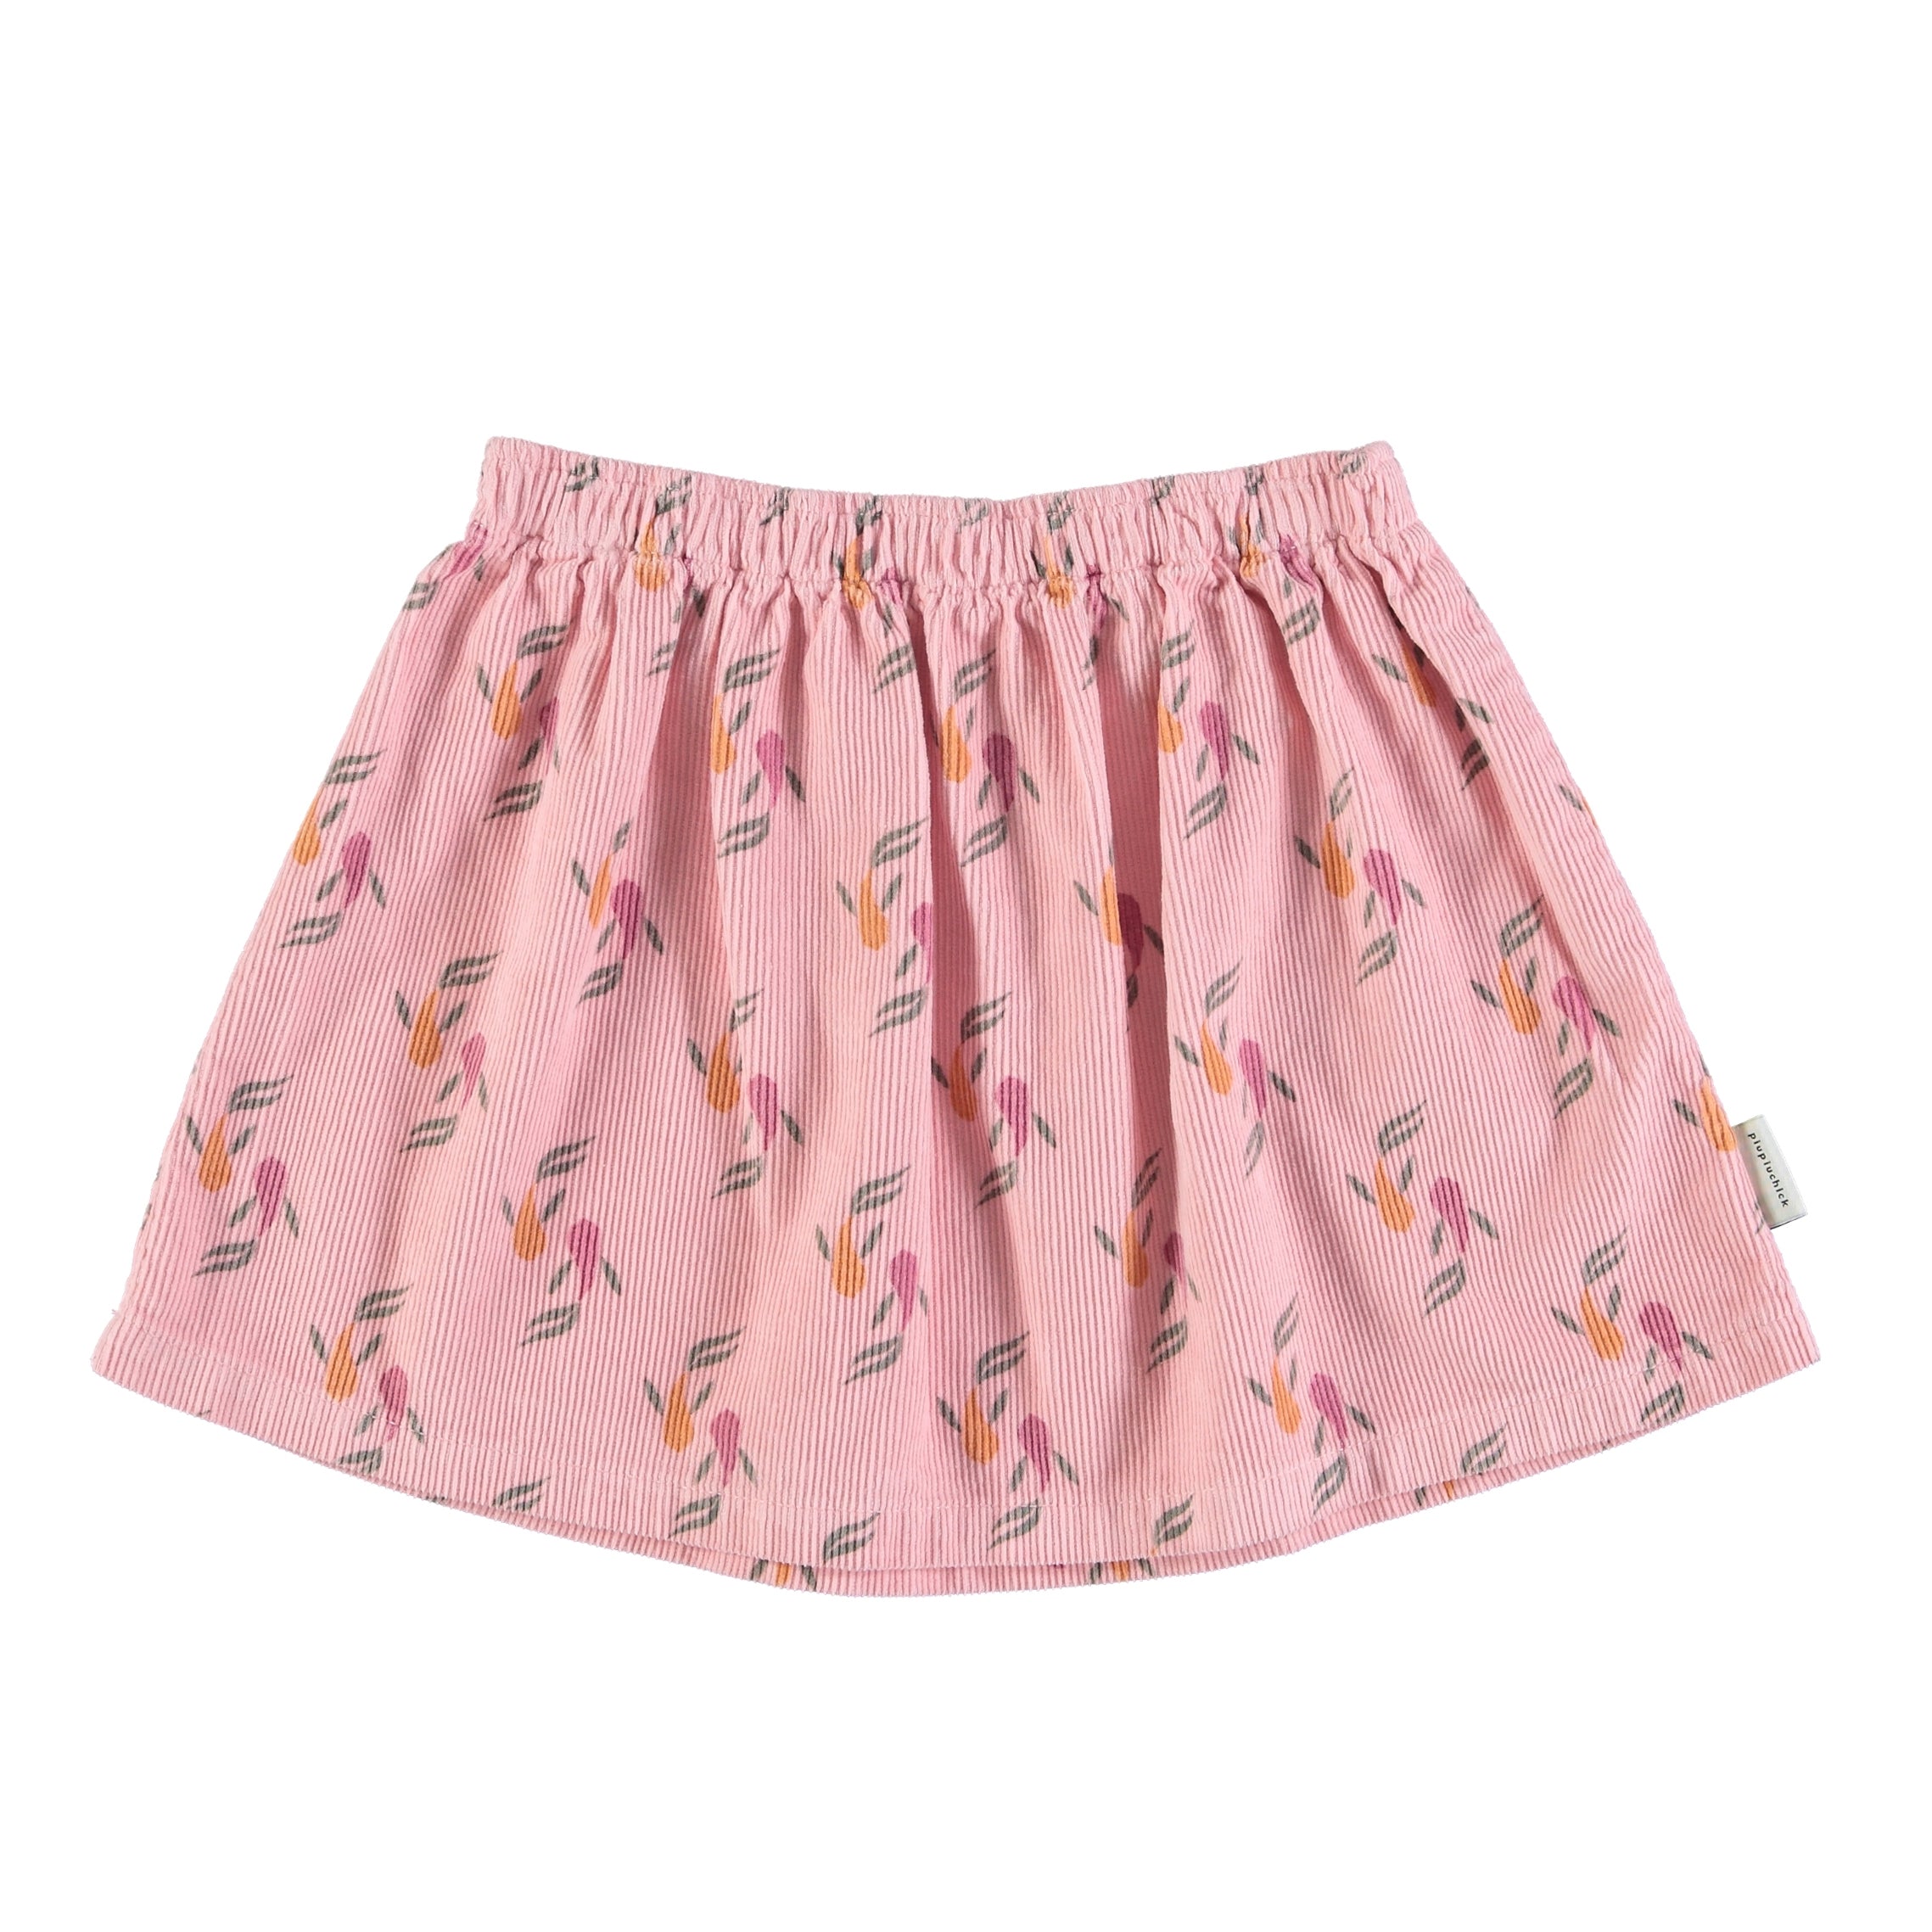 Piupiuchick Pink with Multicolor Fish Short Skirt